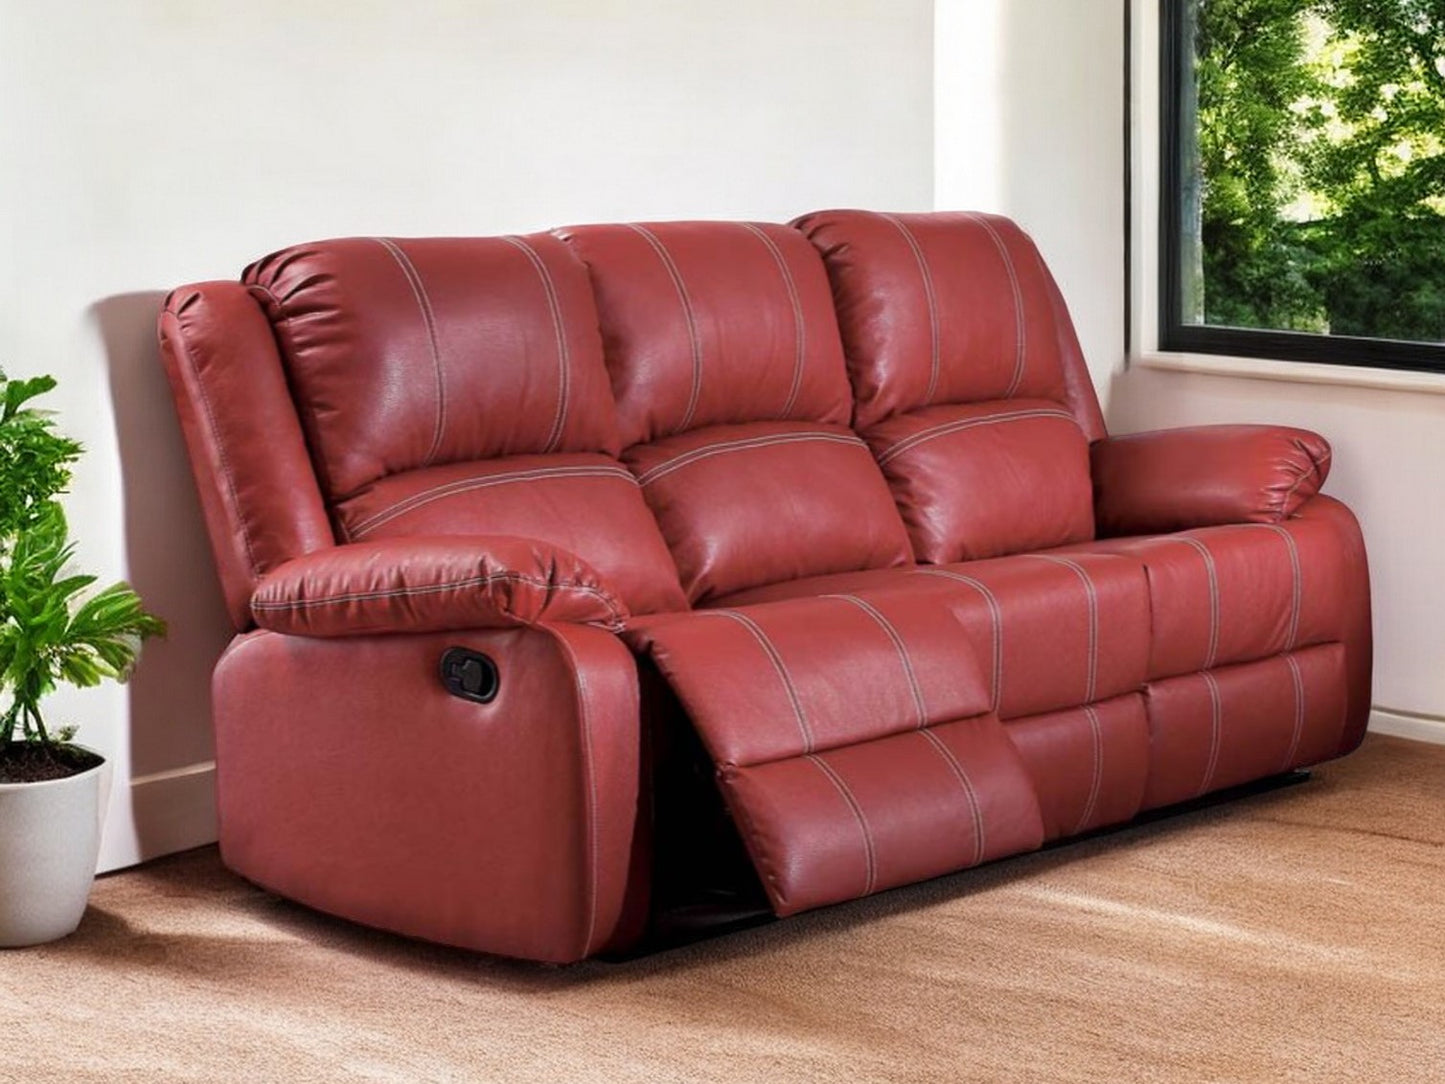 81" Red Faux Leather Reclining Sofa With Black Legs